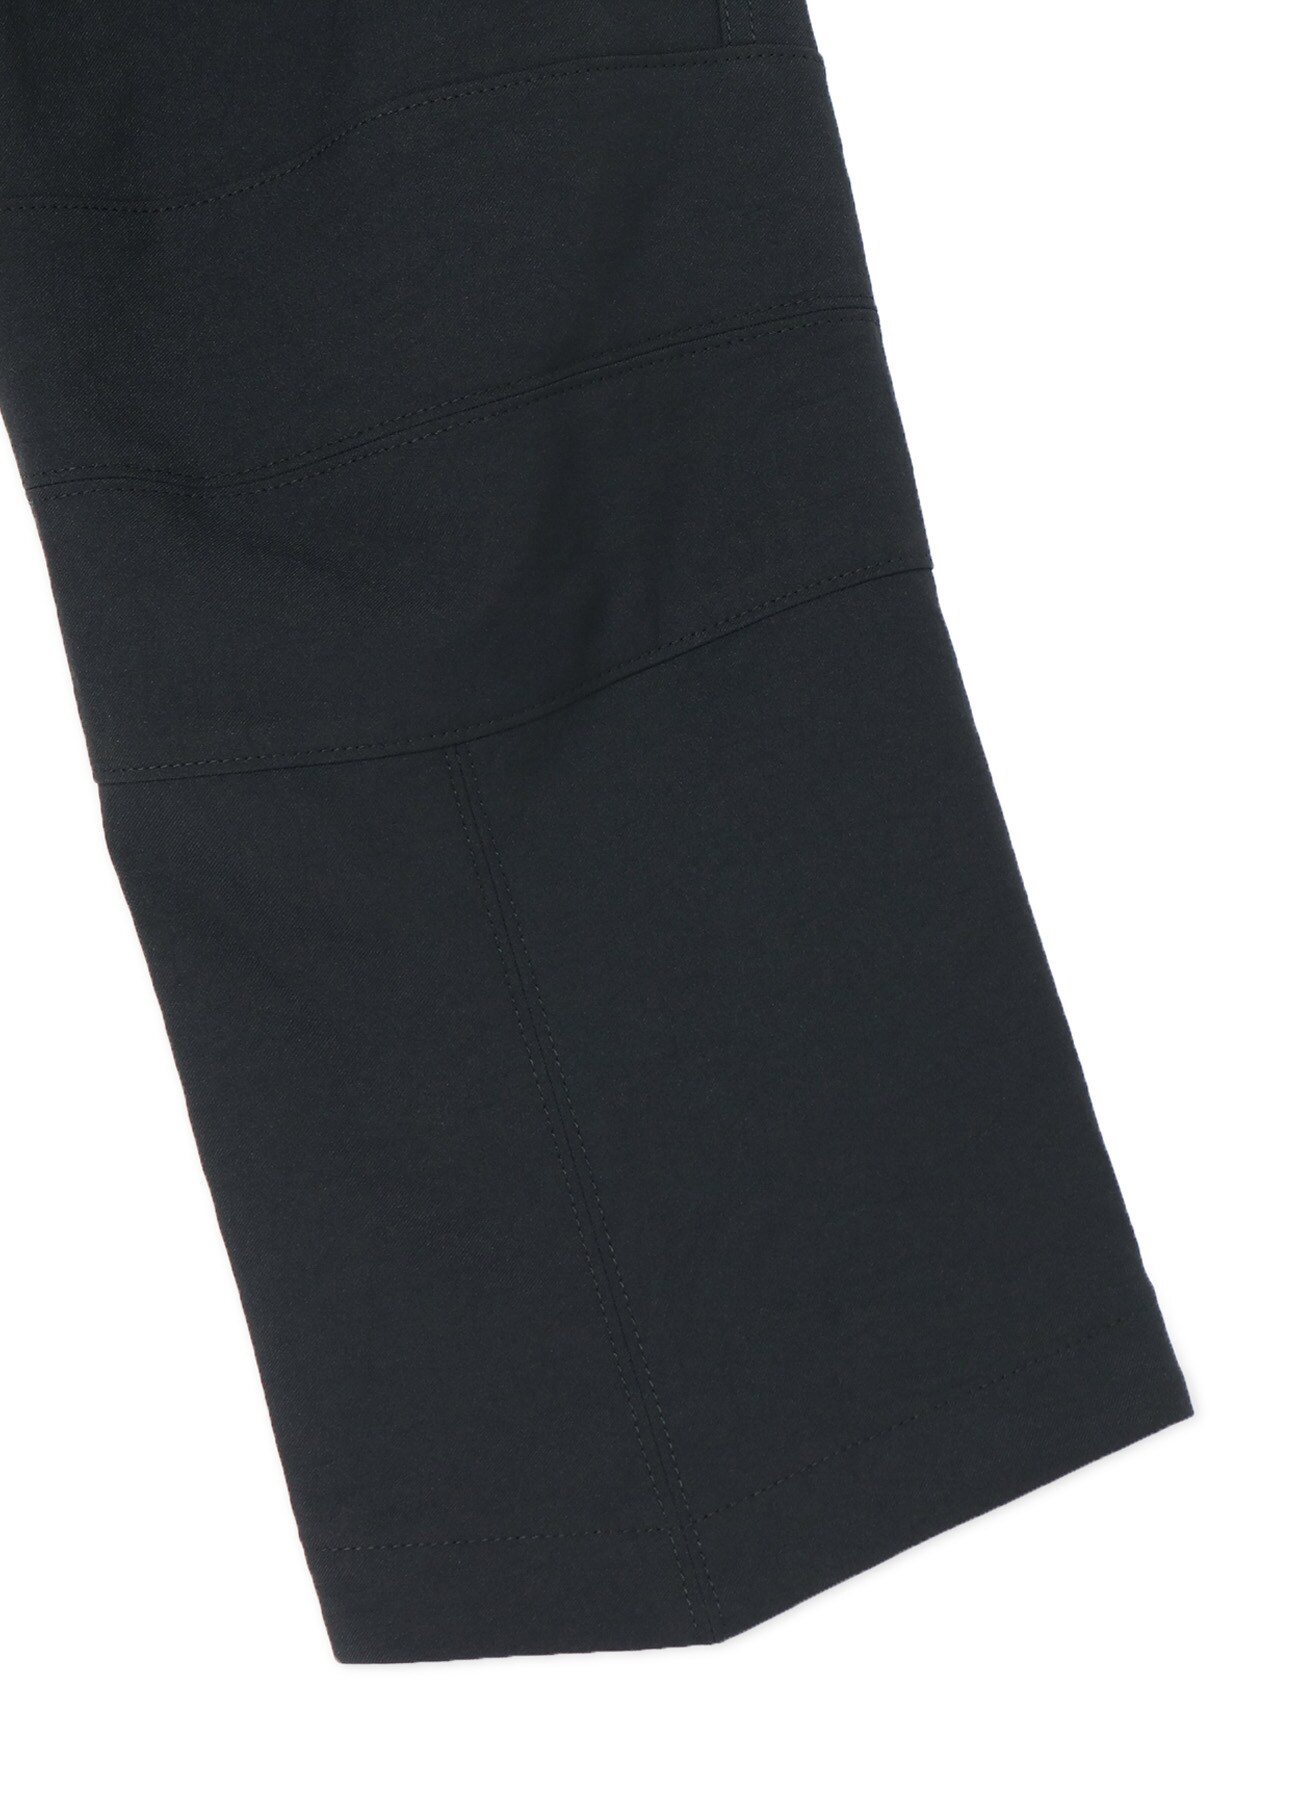 Stretch Twill Knee Patch Pants